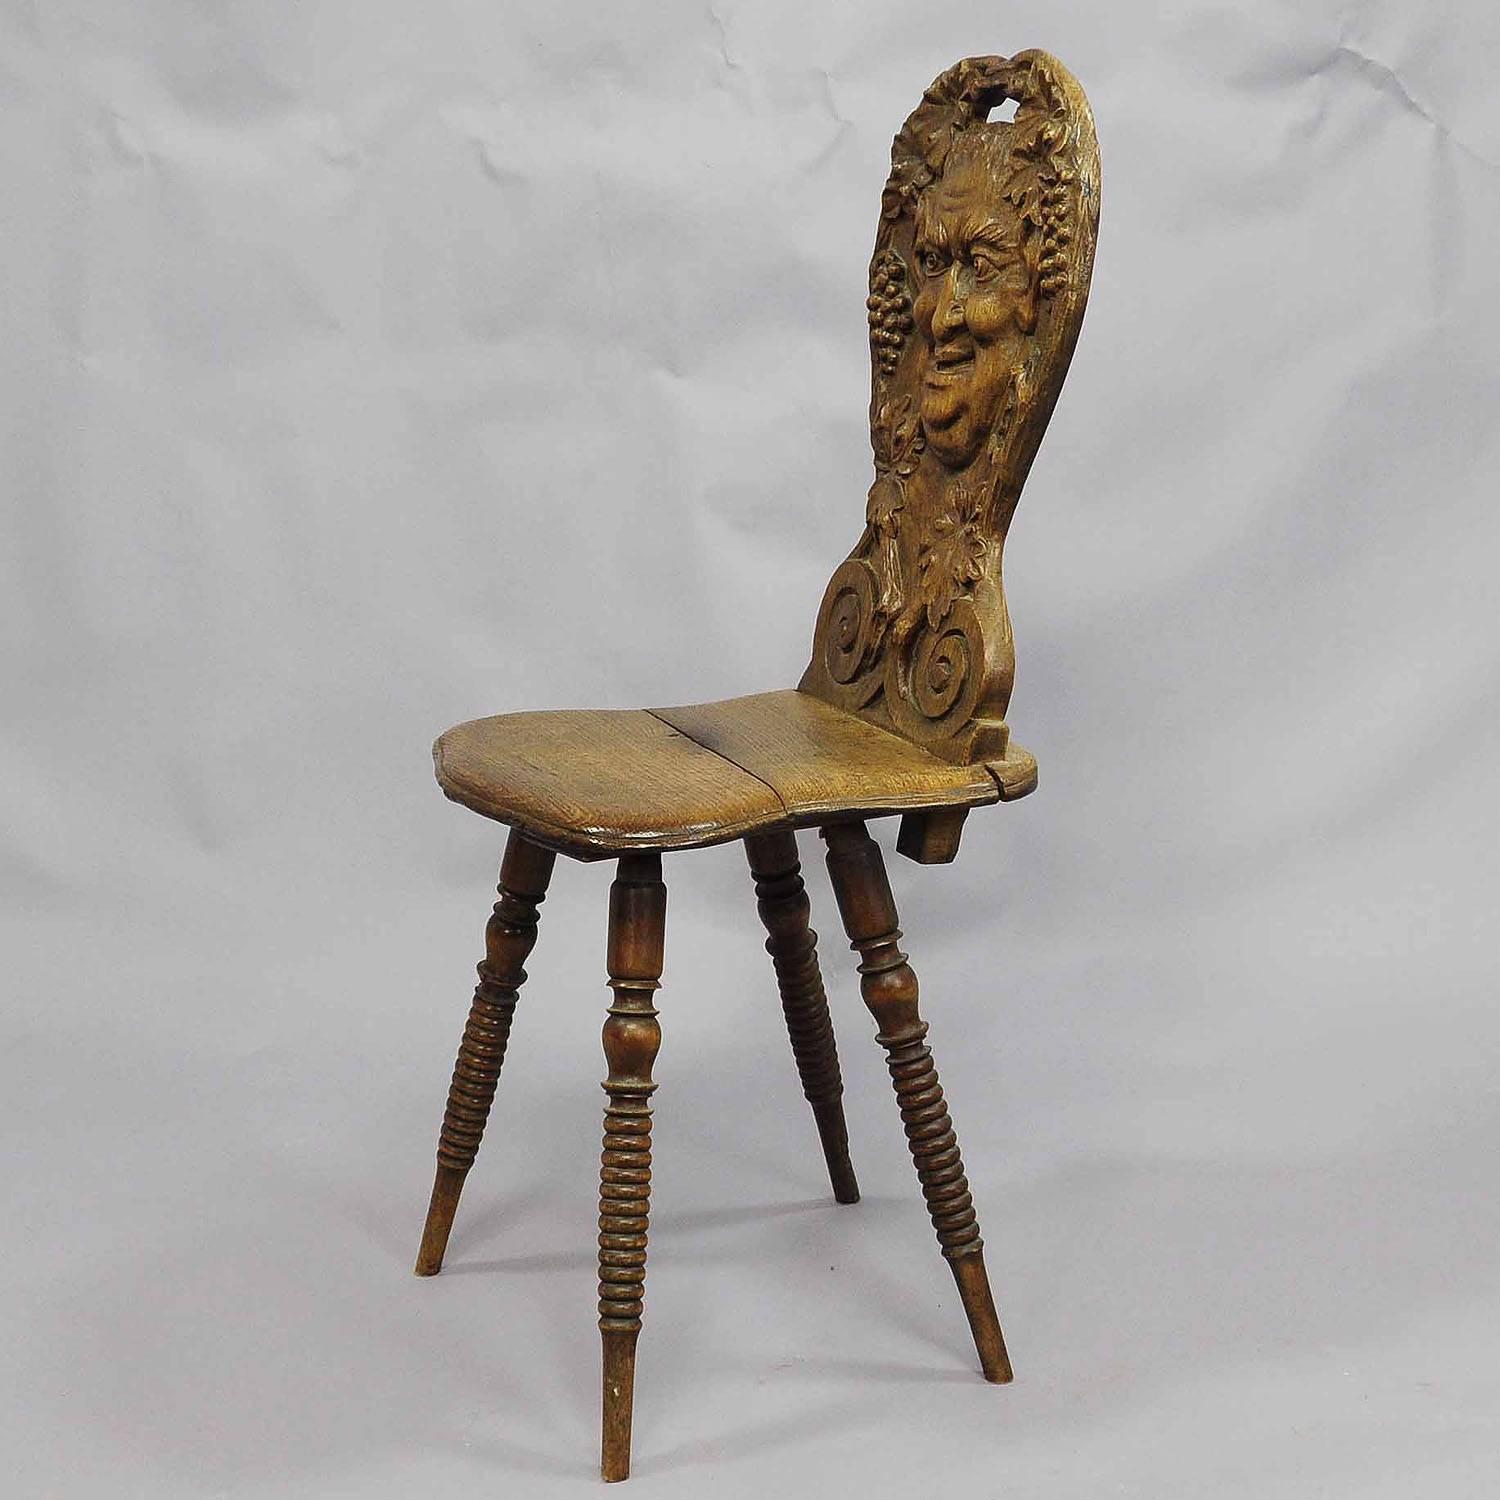 Black Forest Carved Wedding Board Chair with Bacchus, circa 1900